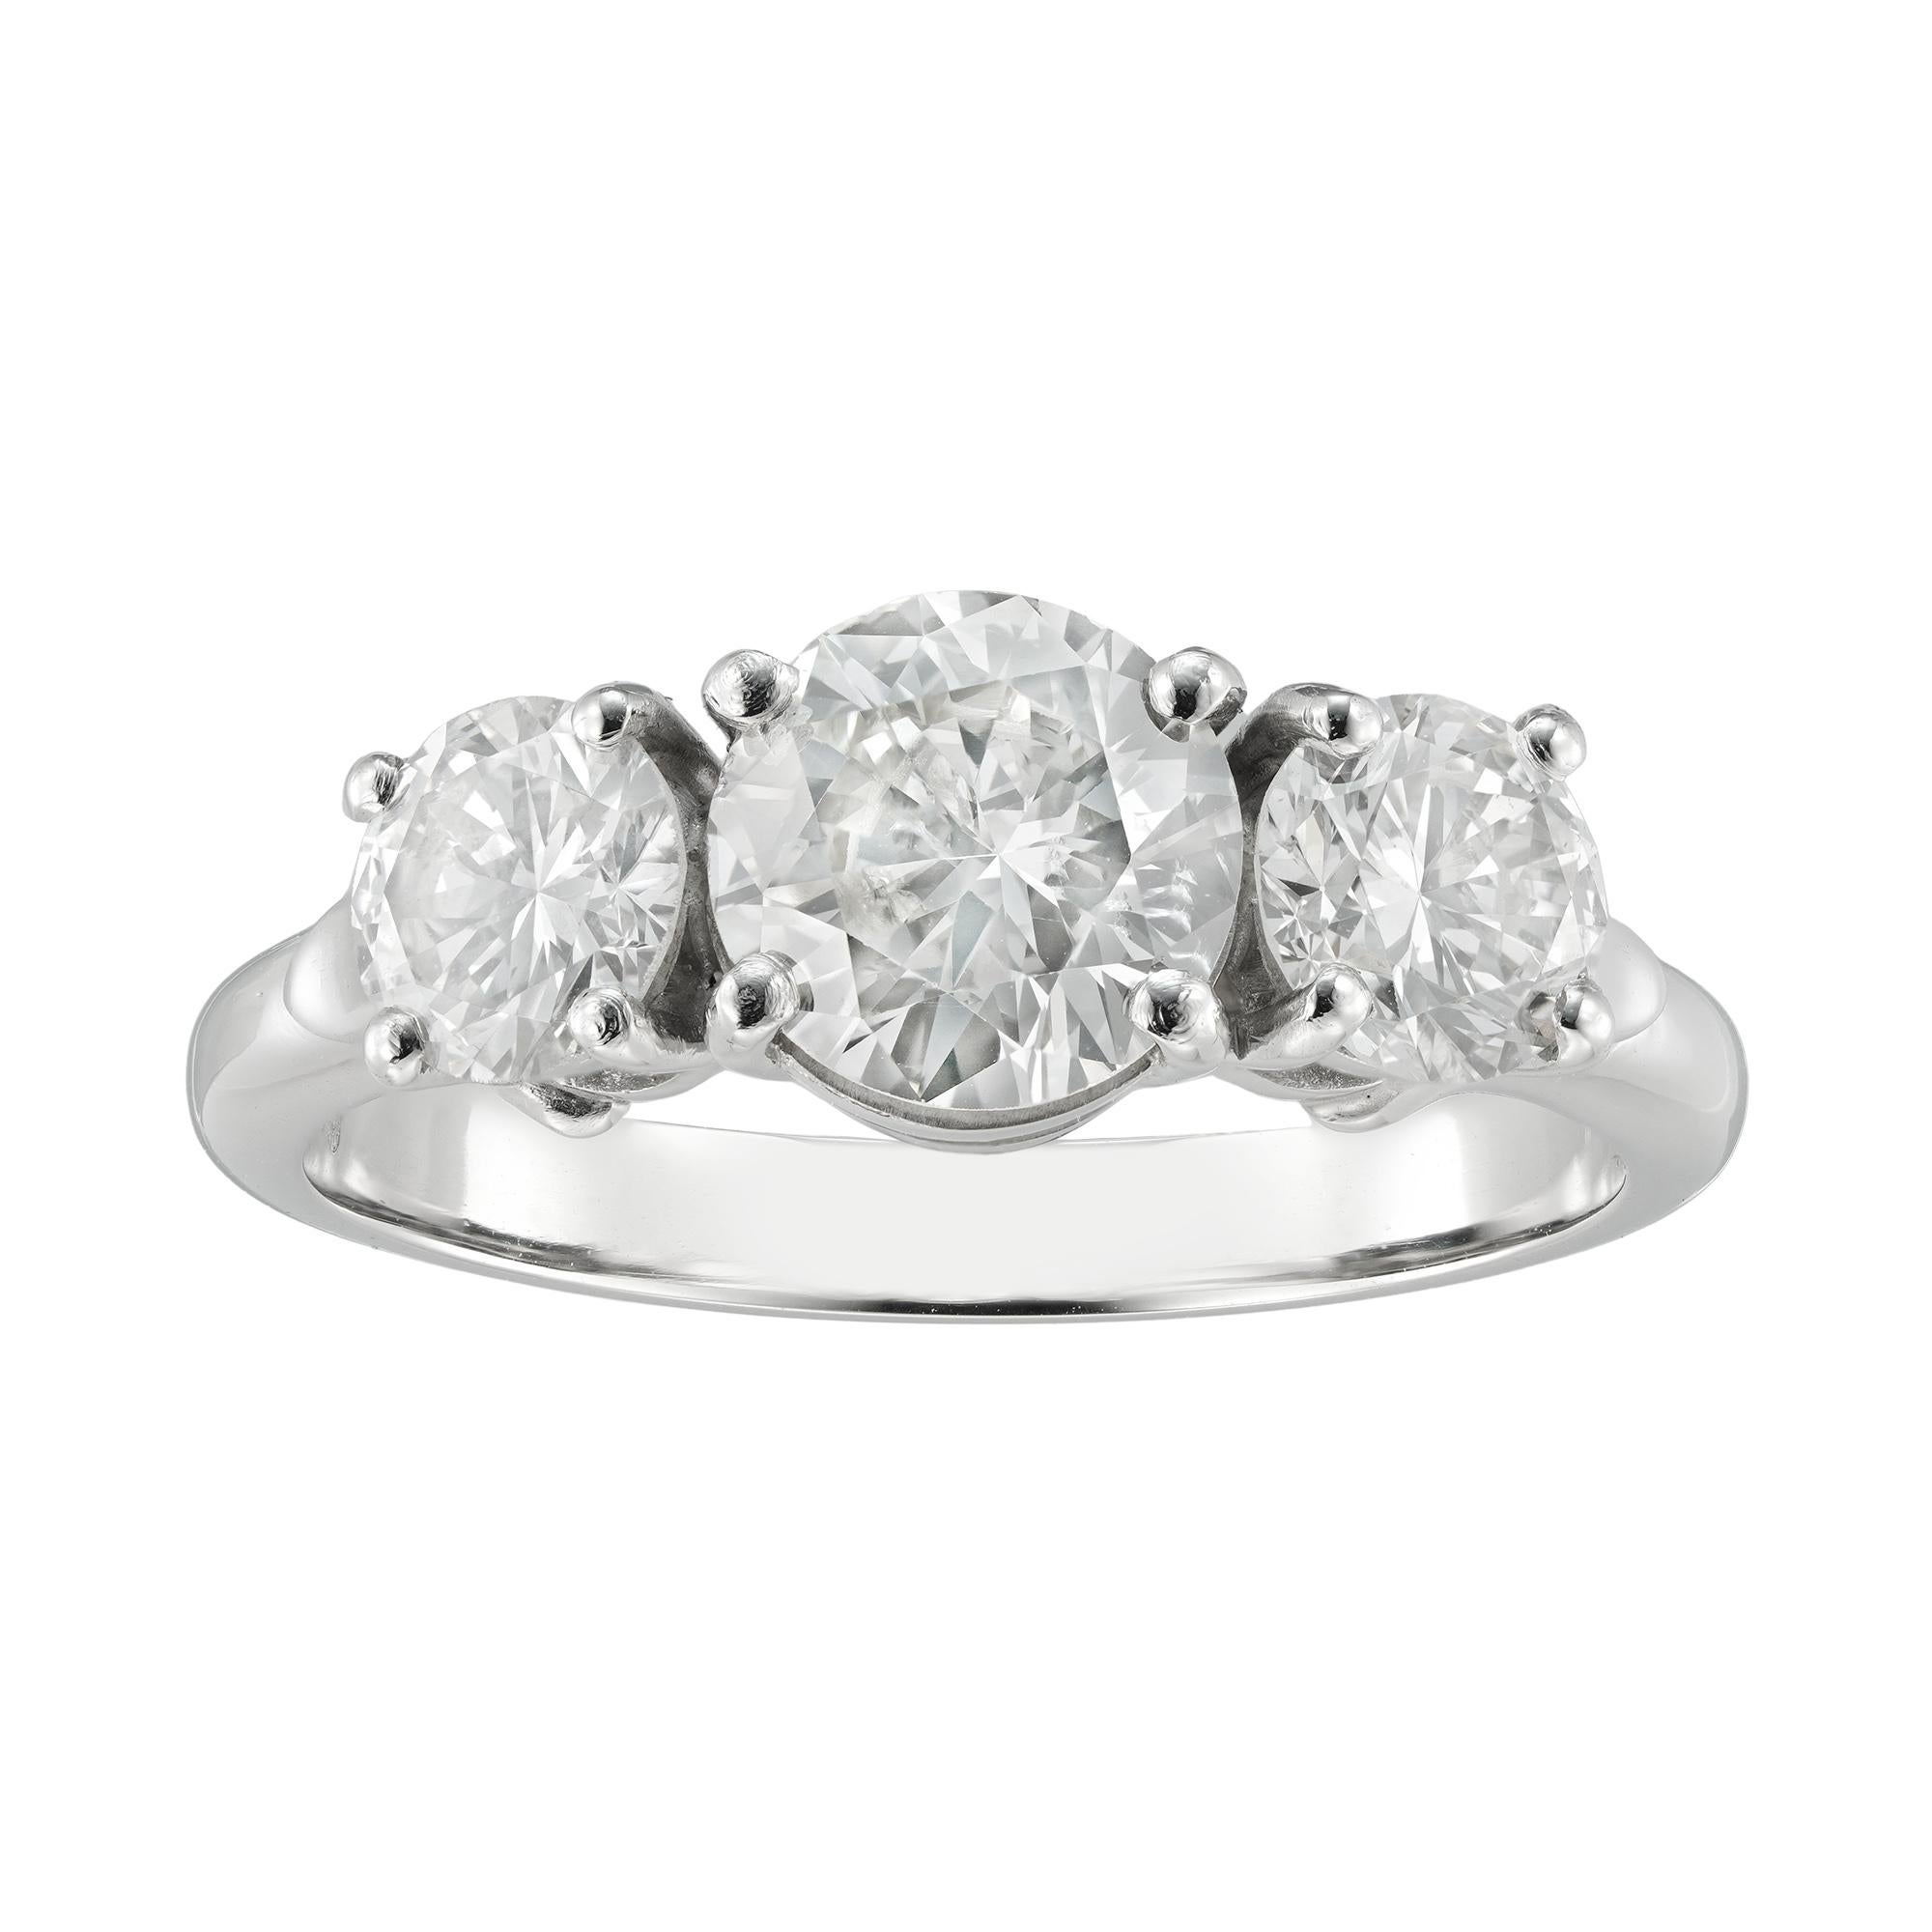 A three-stone diamond ring, the central round brilliant-cut diamond weighing 1.19 carats assessed to be of J colour SI2 clarity, set between two smaller round brilliant-cut diamonds, the one weighing 0.51 and the other 0.57 carats, both assessed to